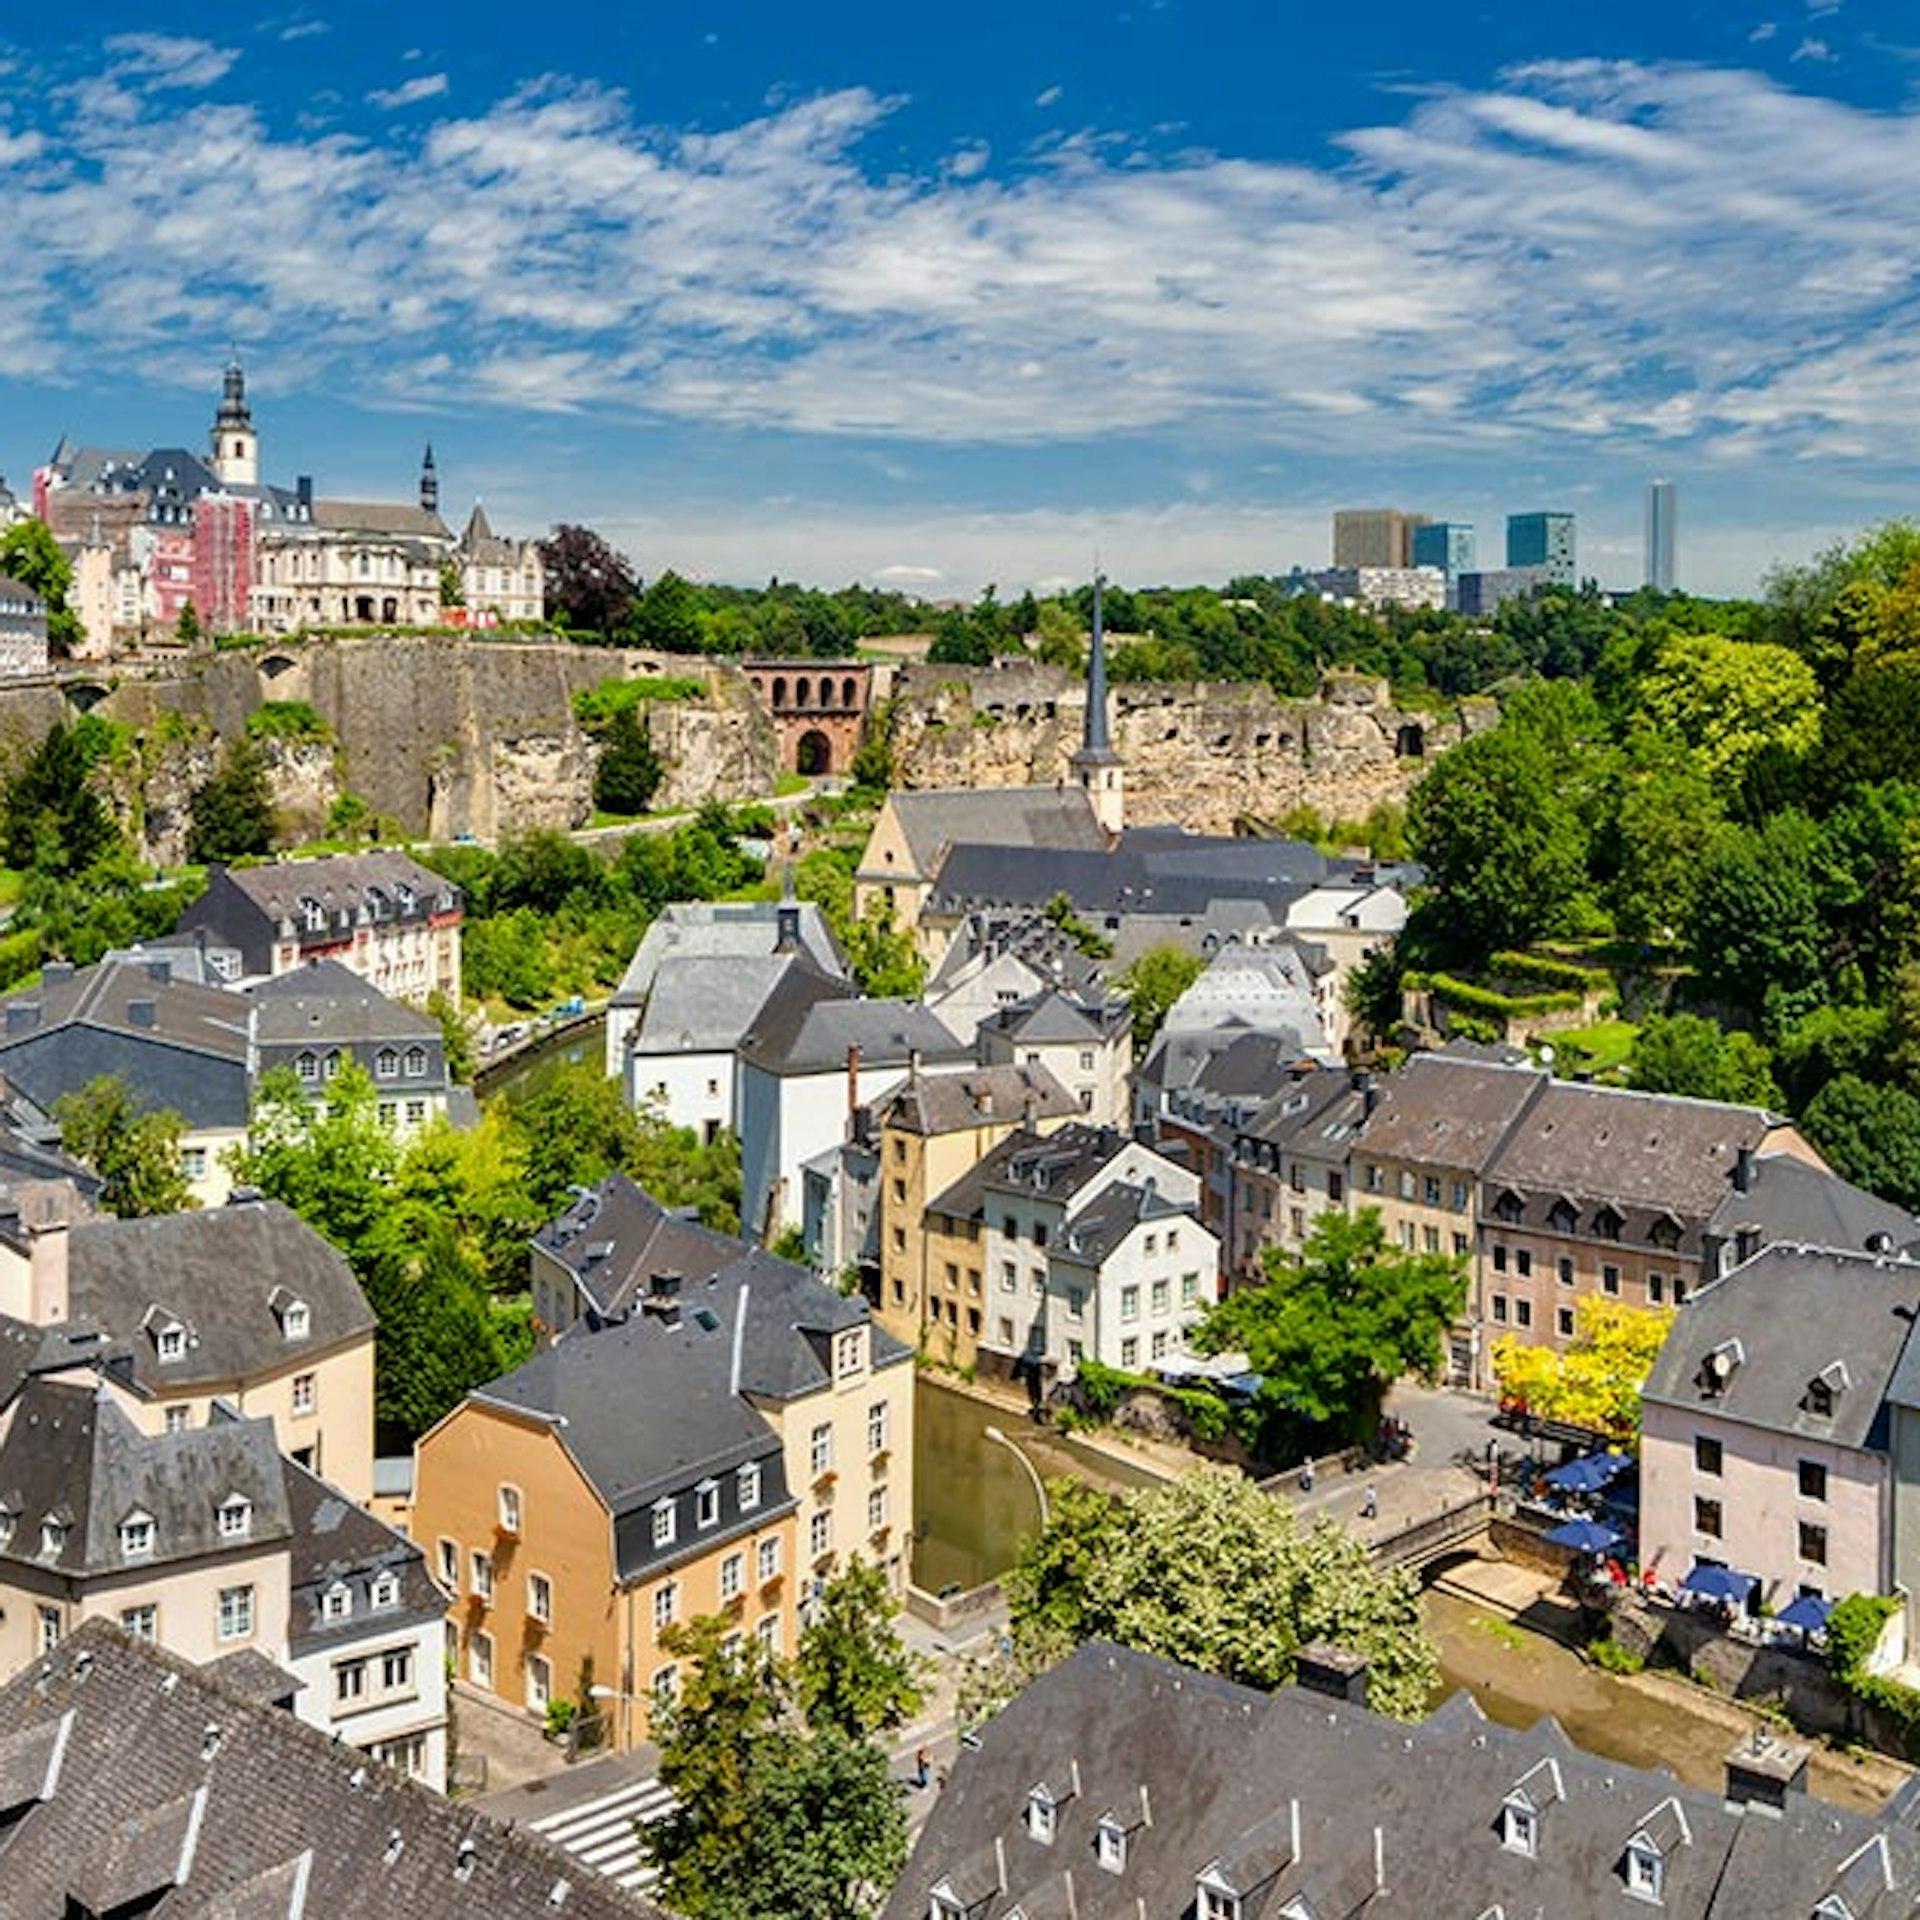 Get the latest news and updates on e-invoicing, e-ordering, e-archiving and indirect tax regulatory requirements for Luxembourg.